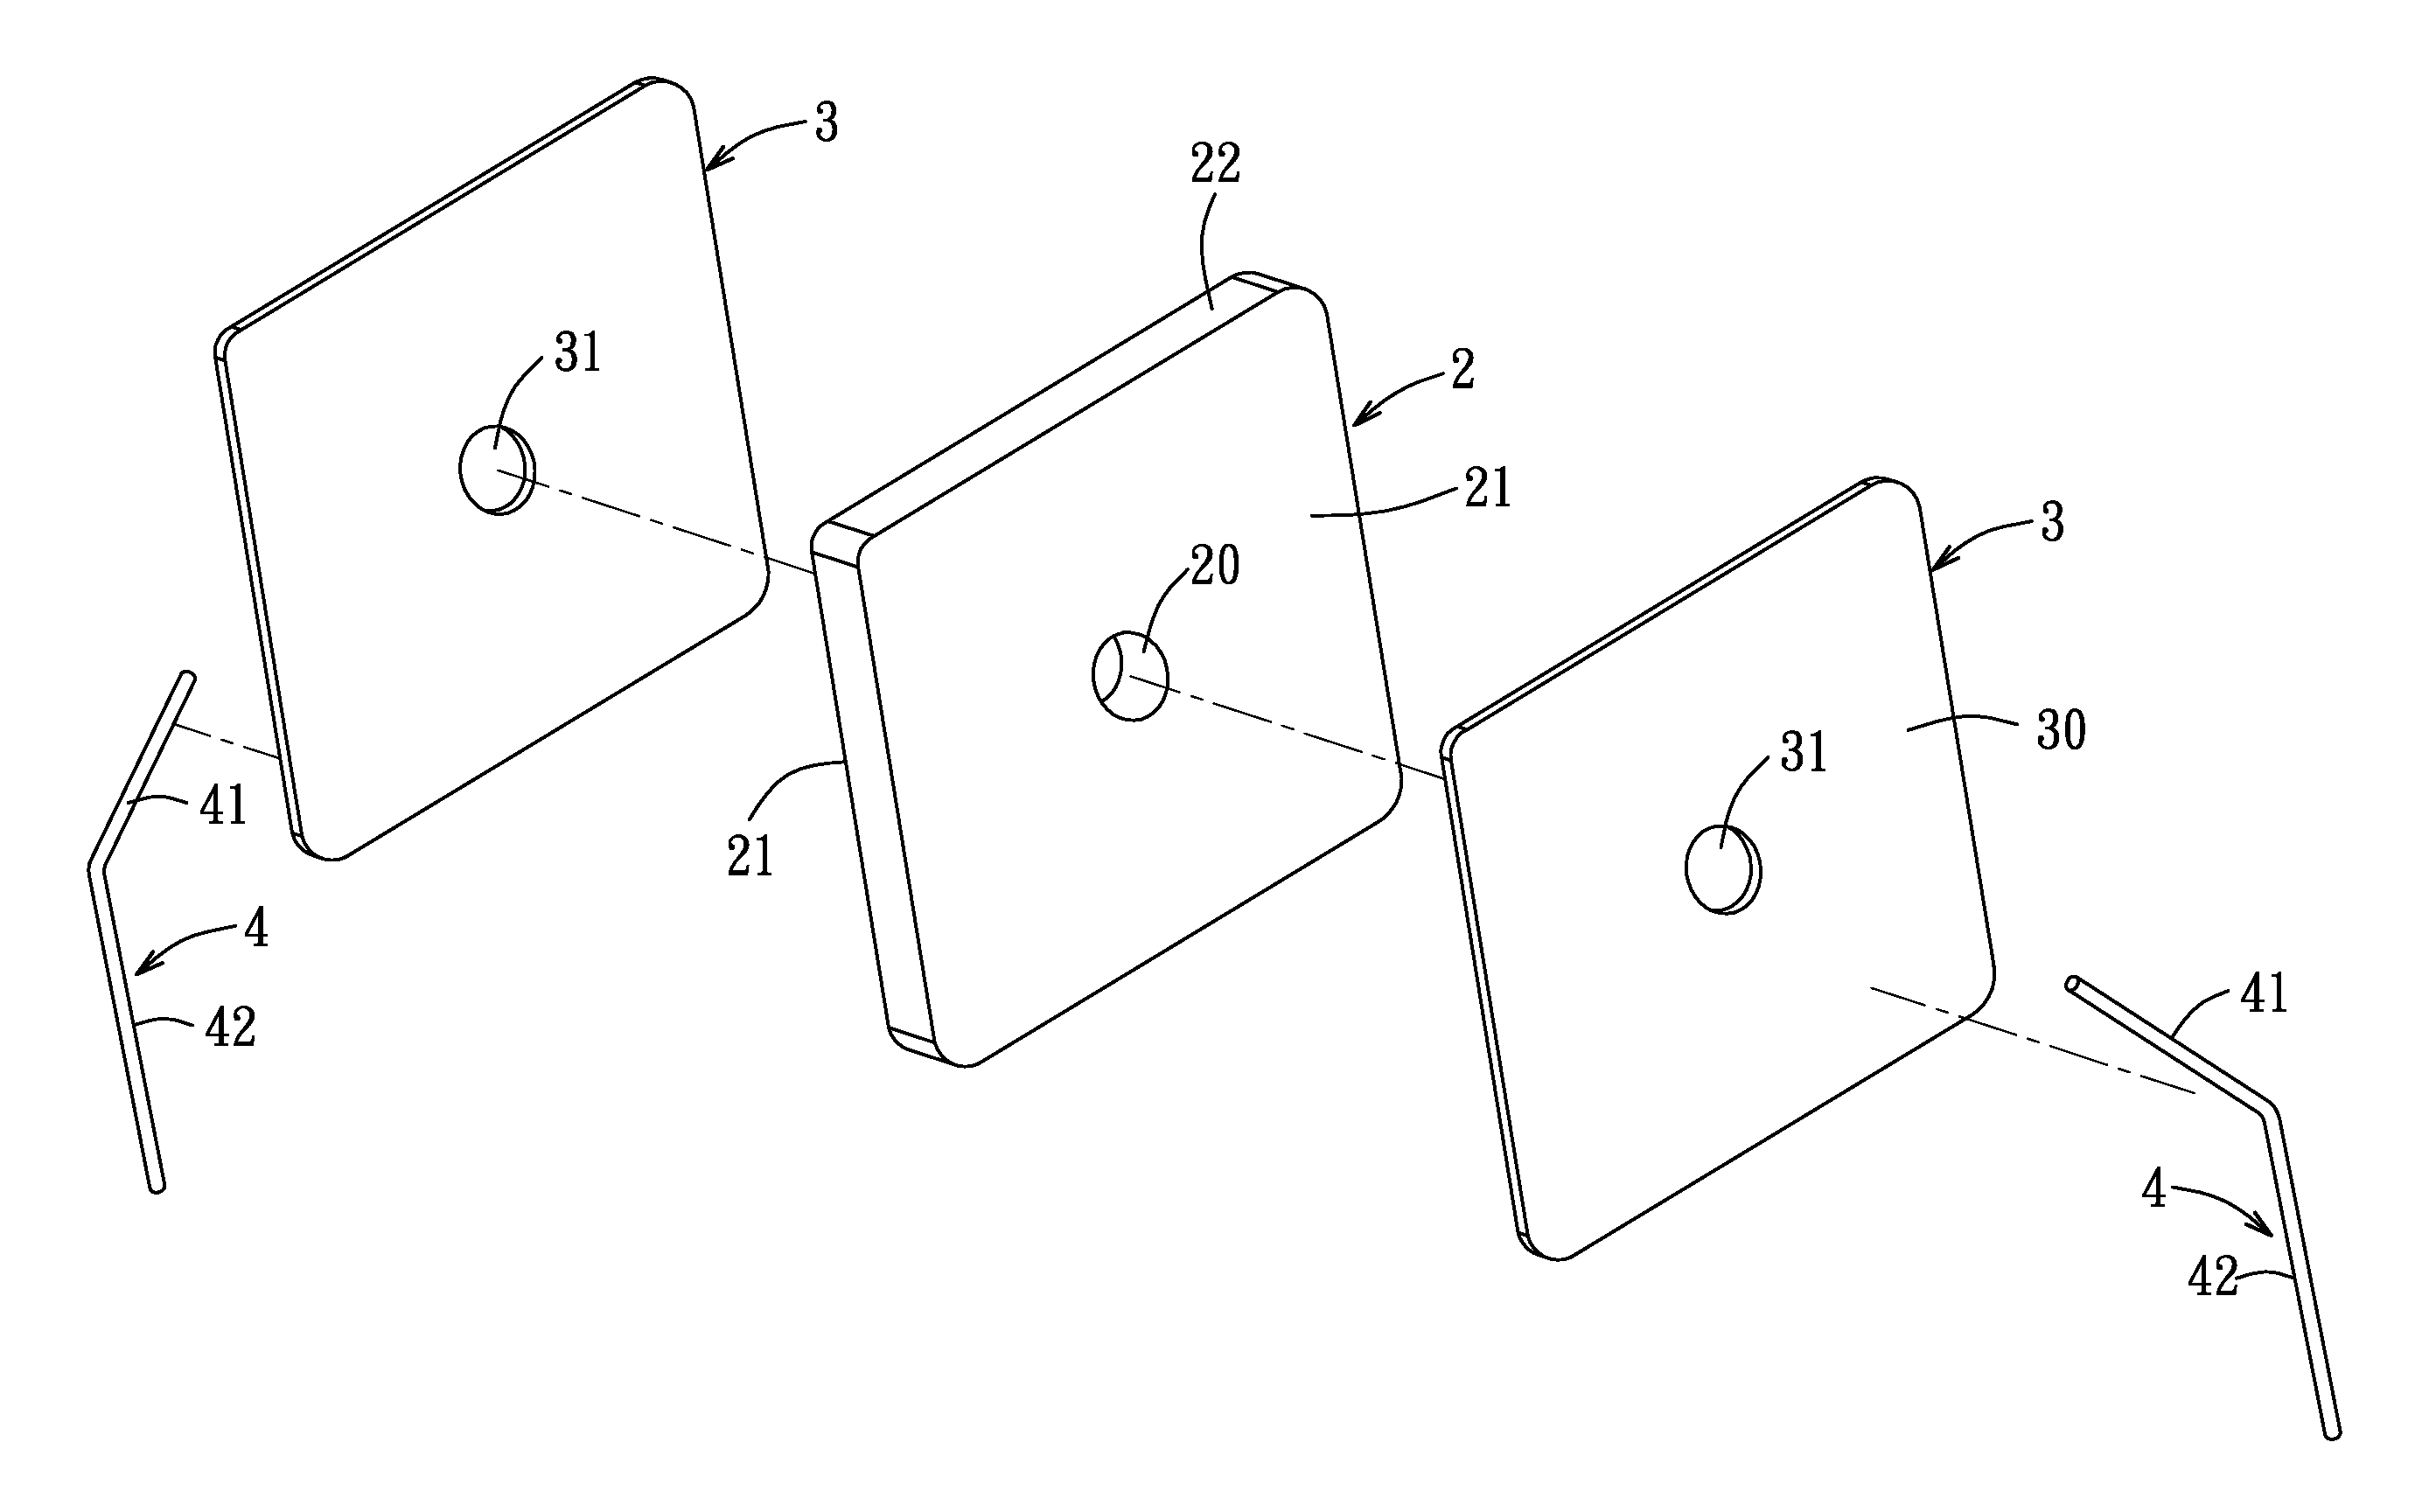 Insertable polymer PTC over-current protection device